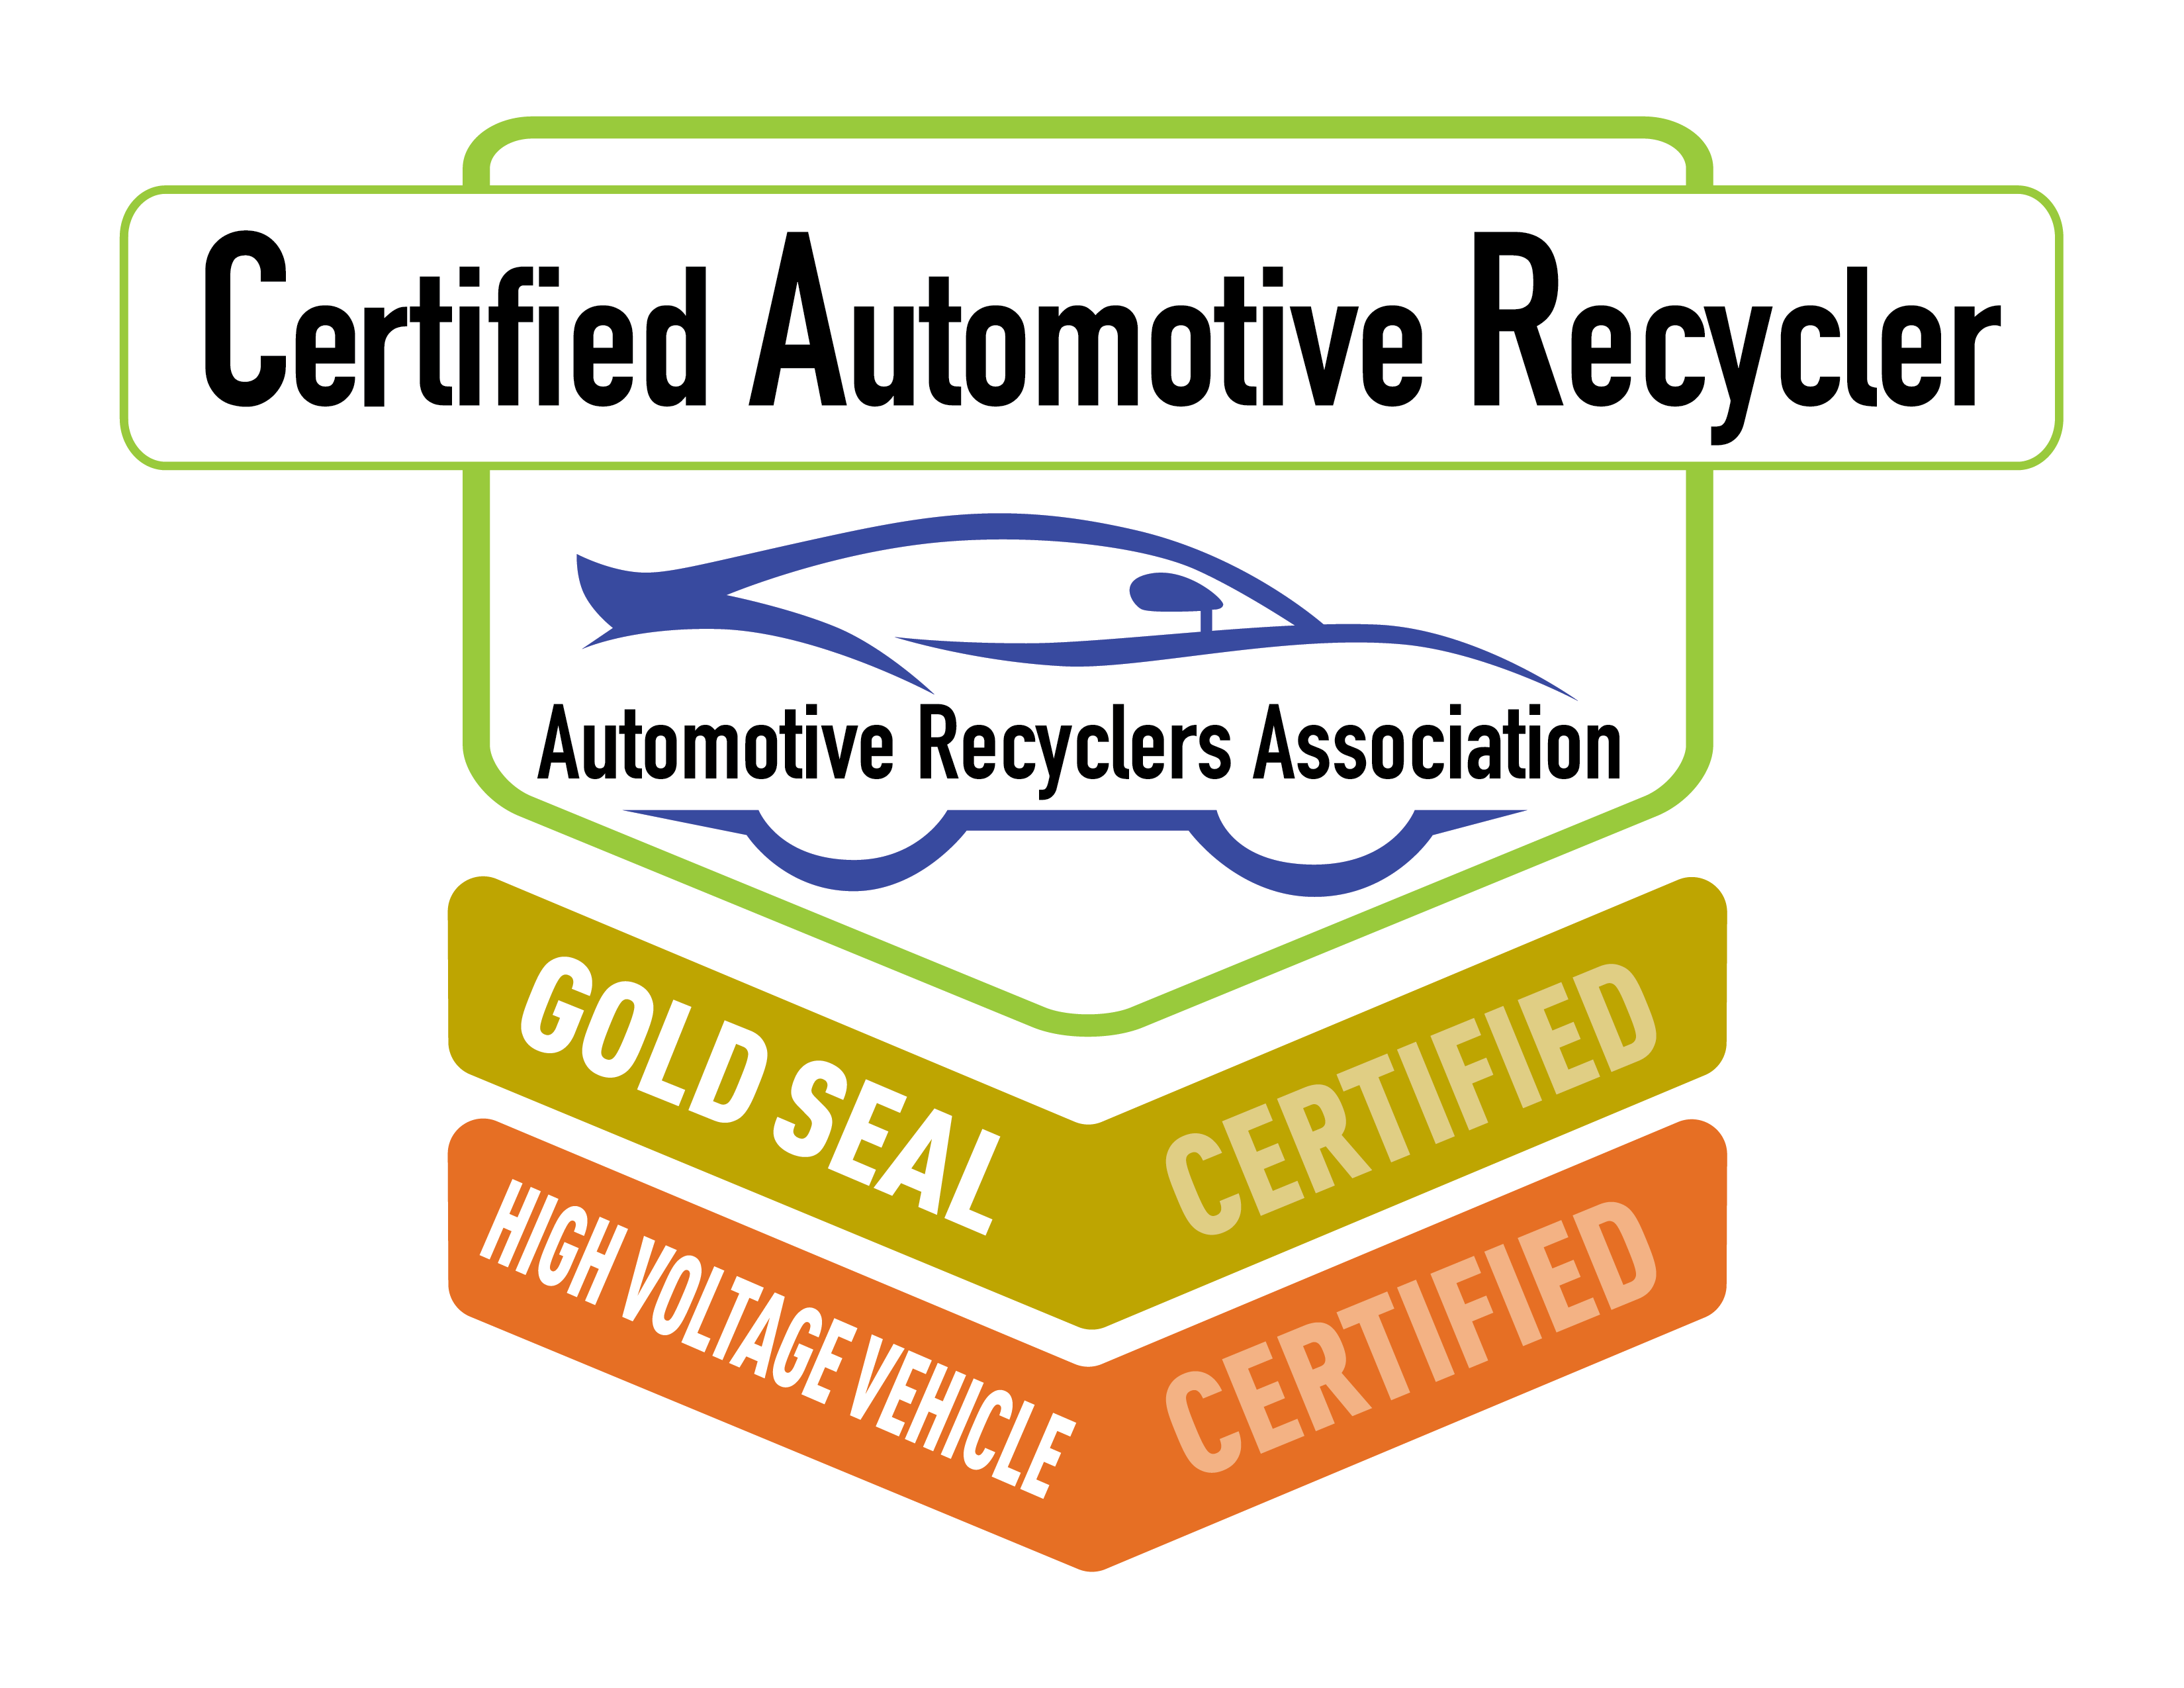 Certified Automotive Recycler, Gold Seal